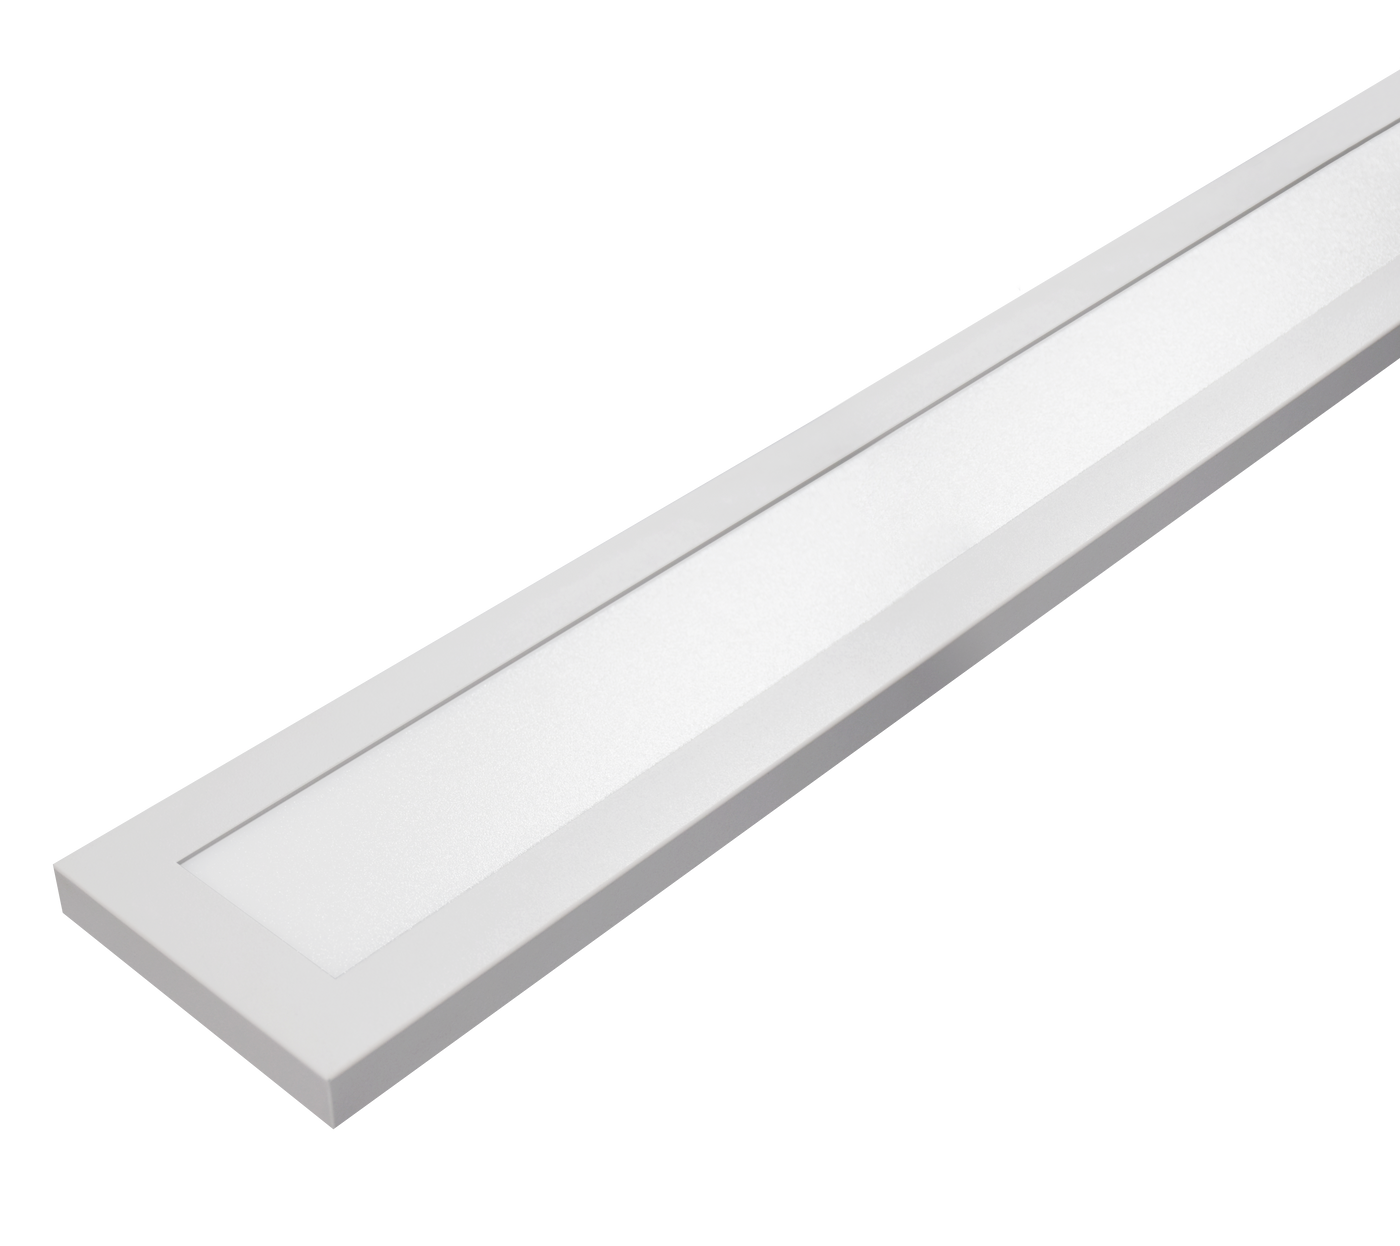 4FT Slim 6" Linear Surface Light, 3600 Lumen Max, Wattage and CCT Selectable, 110-277V